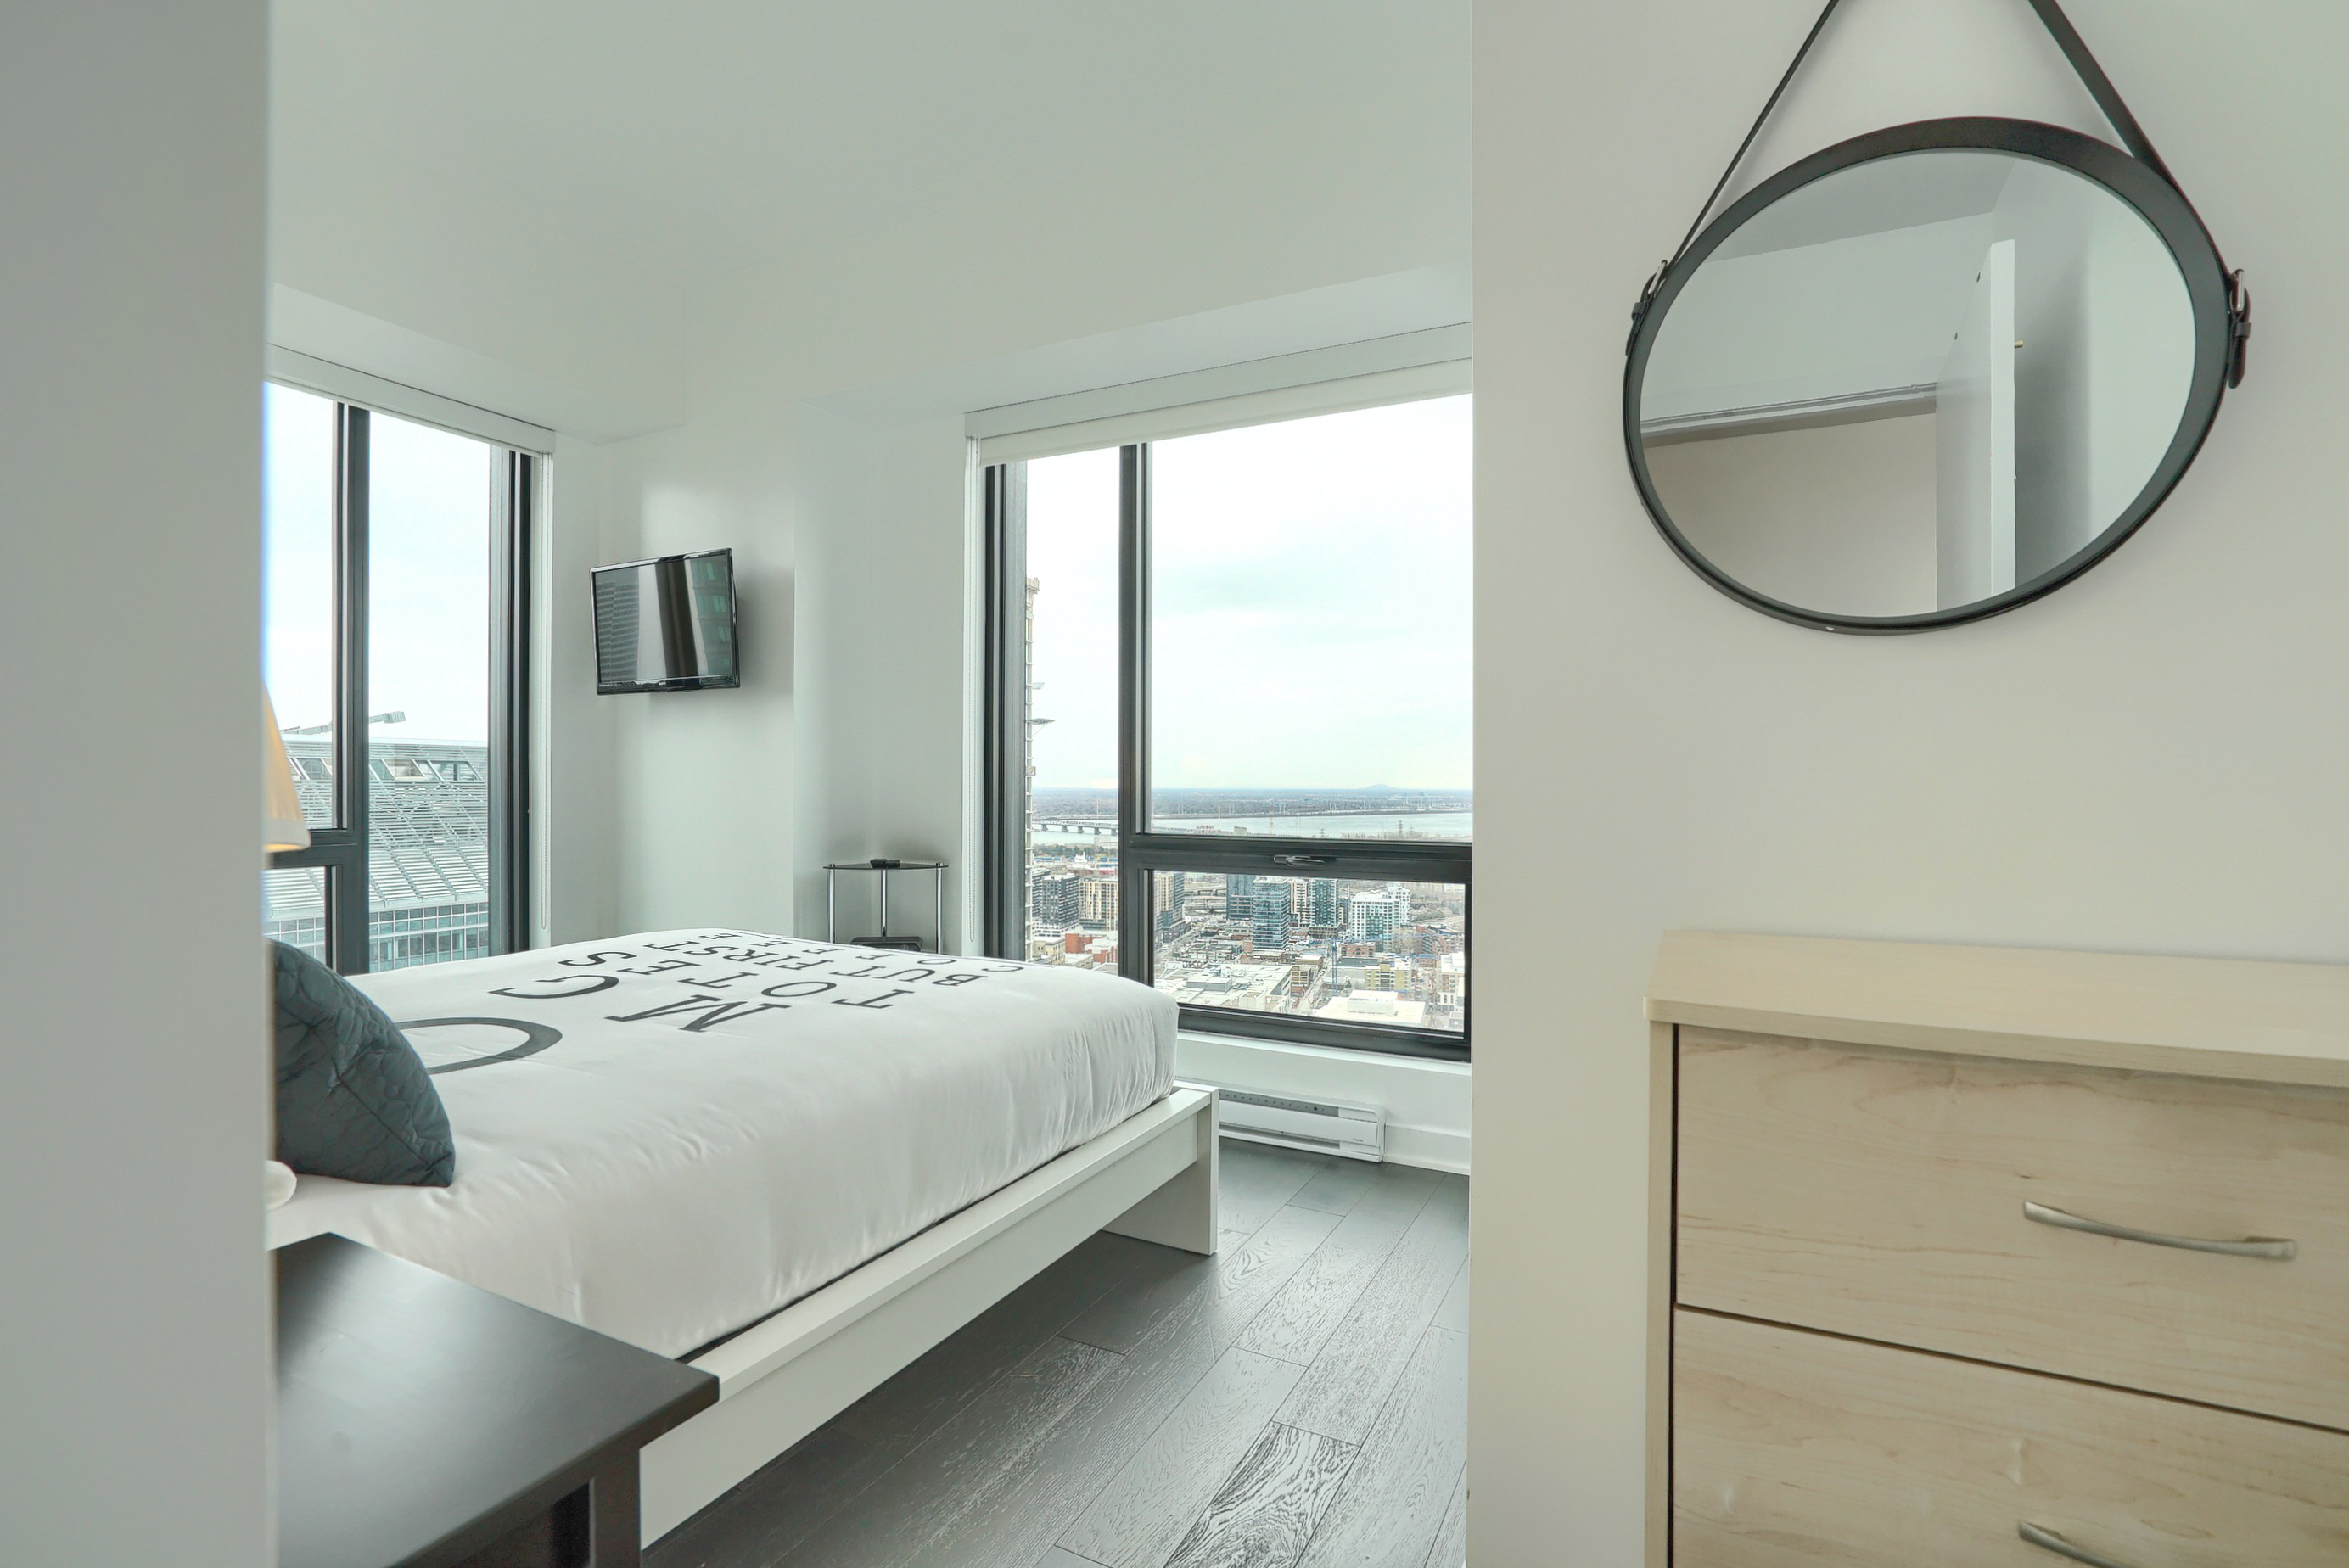 Peek into the bedroom showing the unique bedding - white with gray lettering - and two floor-to-ceiling windows brightening your morning in this furnished executive housing apartment in montreal